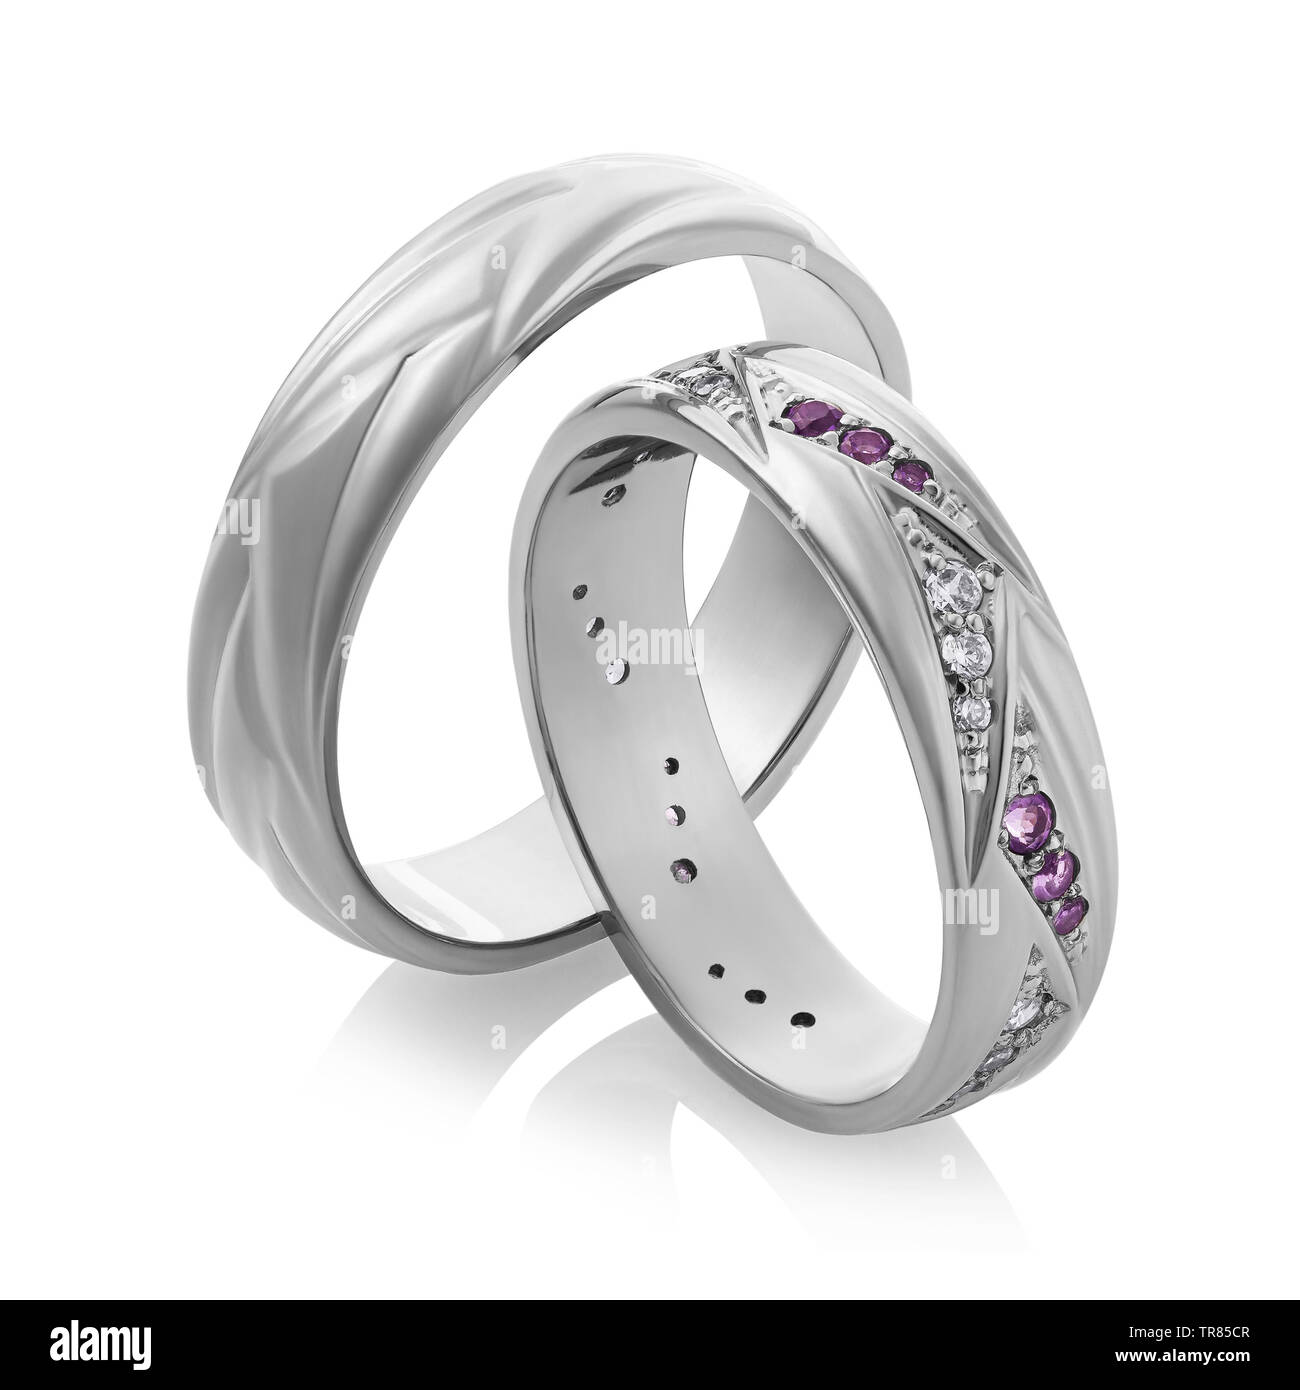 rsp unique Adjustable Couple Ring for lovers in silver stylish king Queen  design Alloy Sterling Silver Plated Ring Set Price in India - Buy rsp  unique Adjustable Couple Ring for lovers in